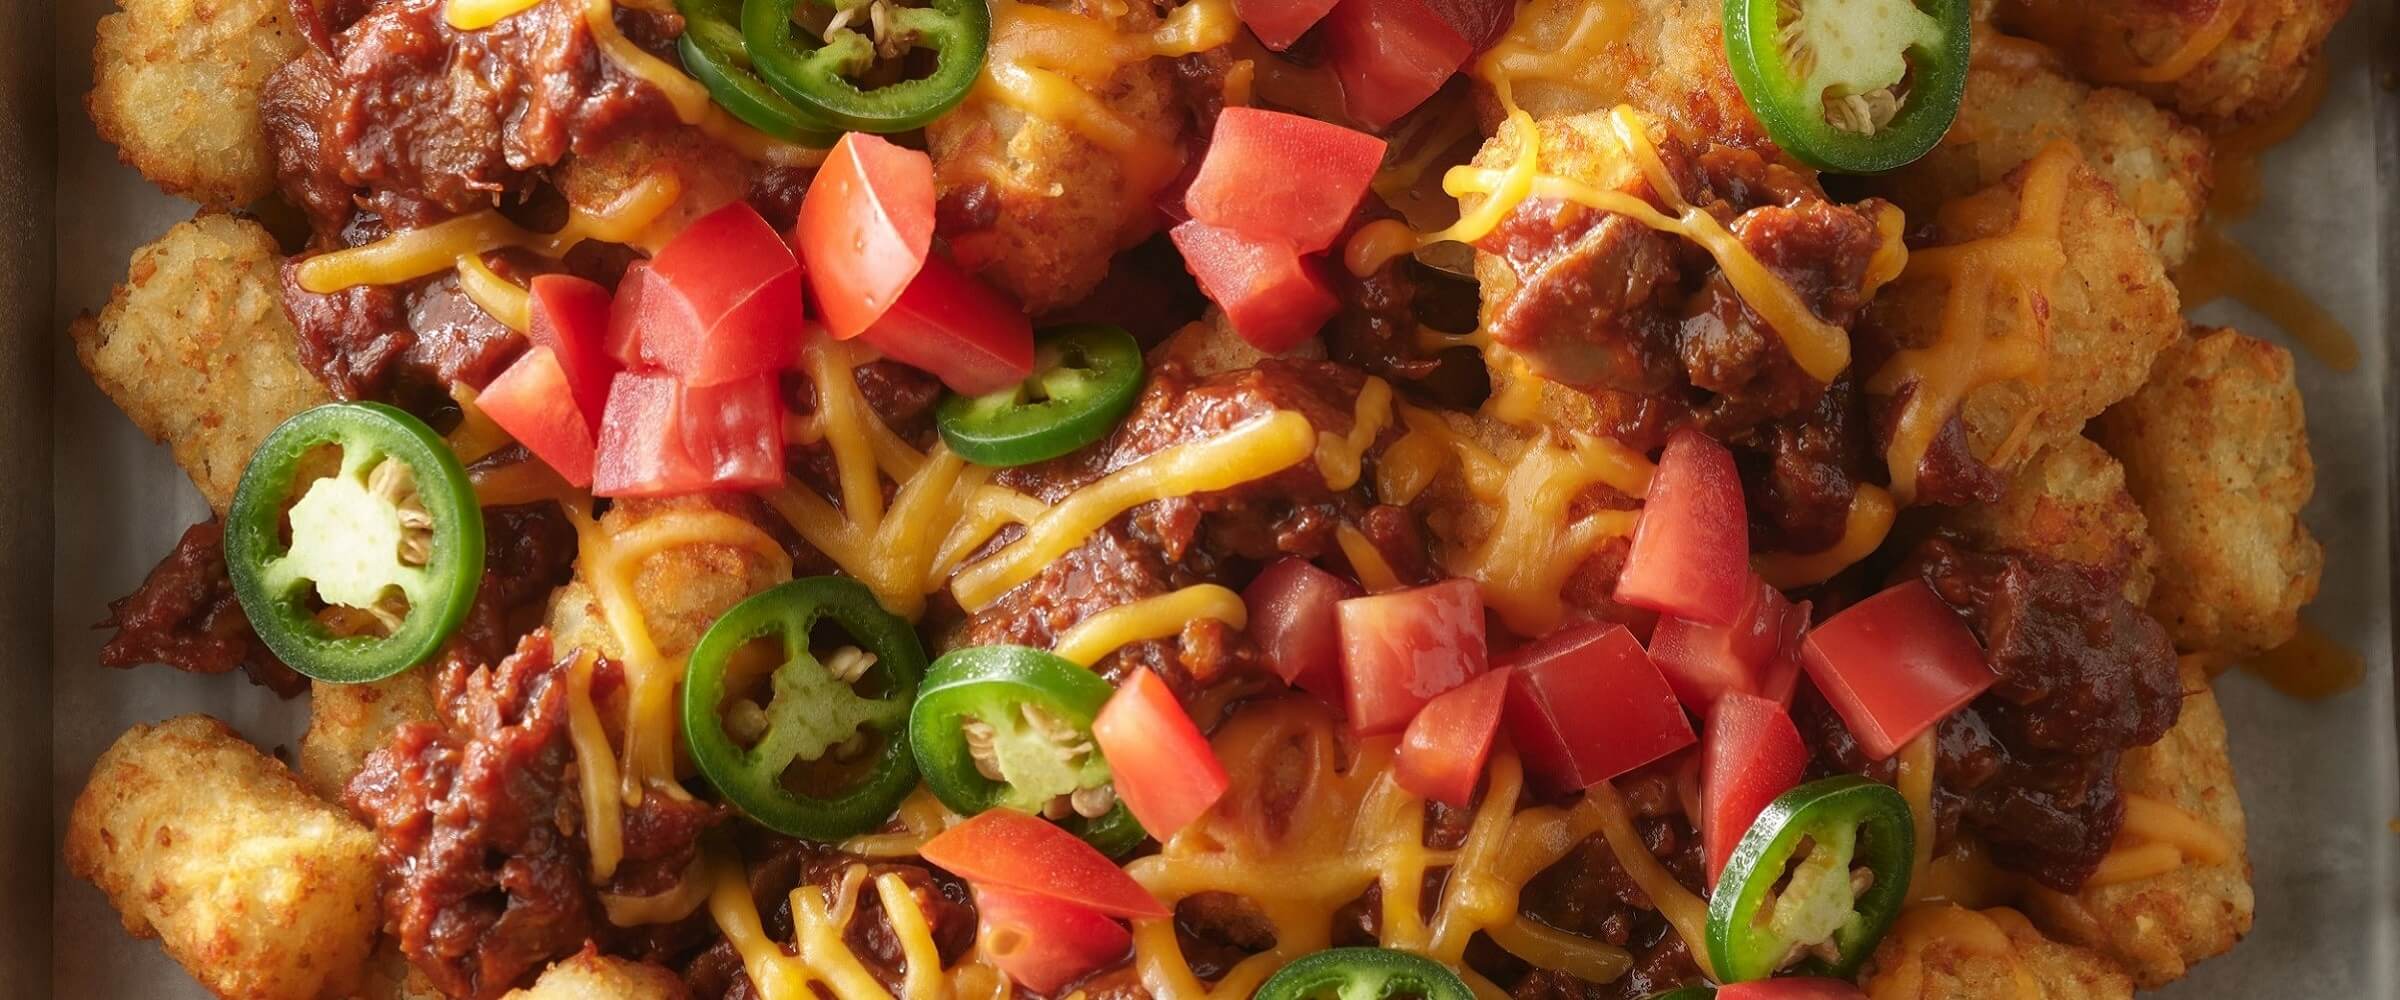 Loaded BBQ tachos topped with cheese, tomatoes and jalapenos